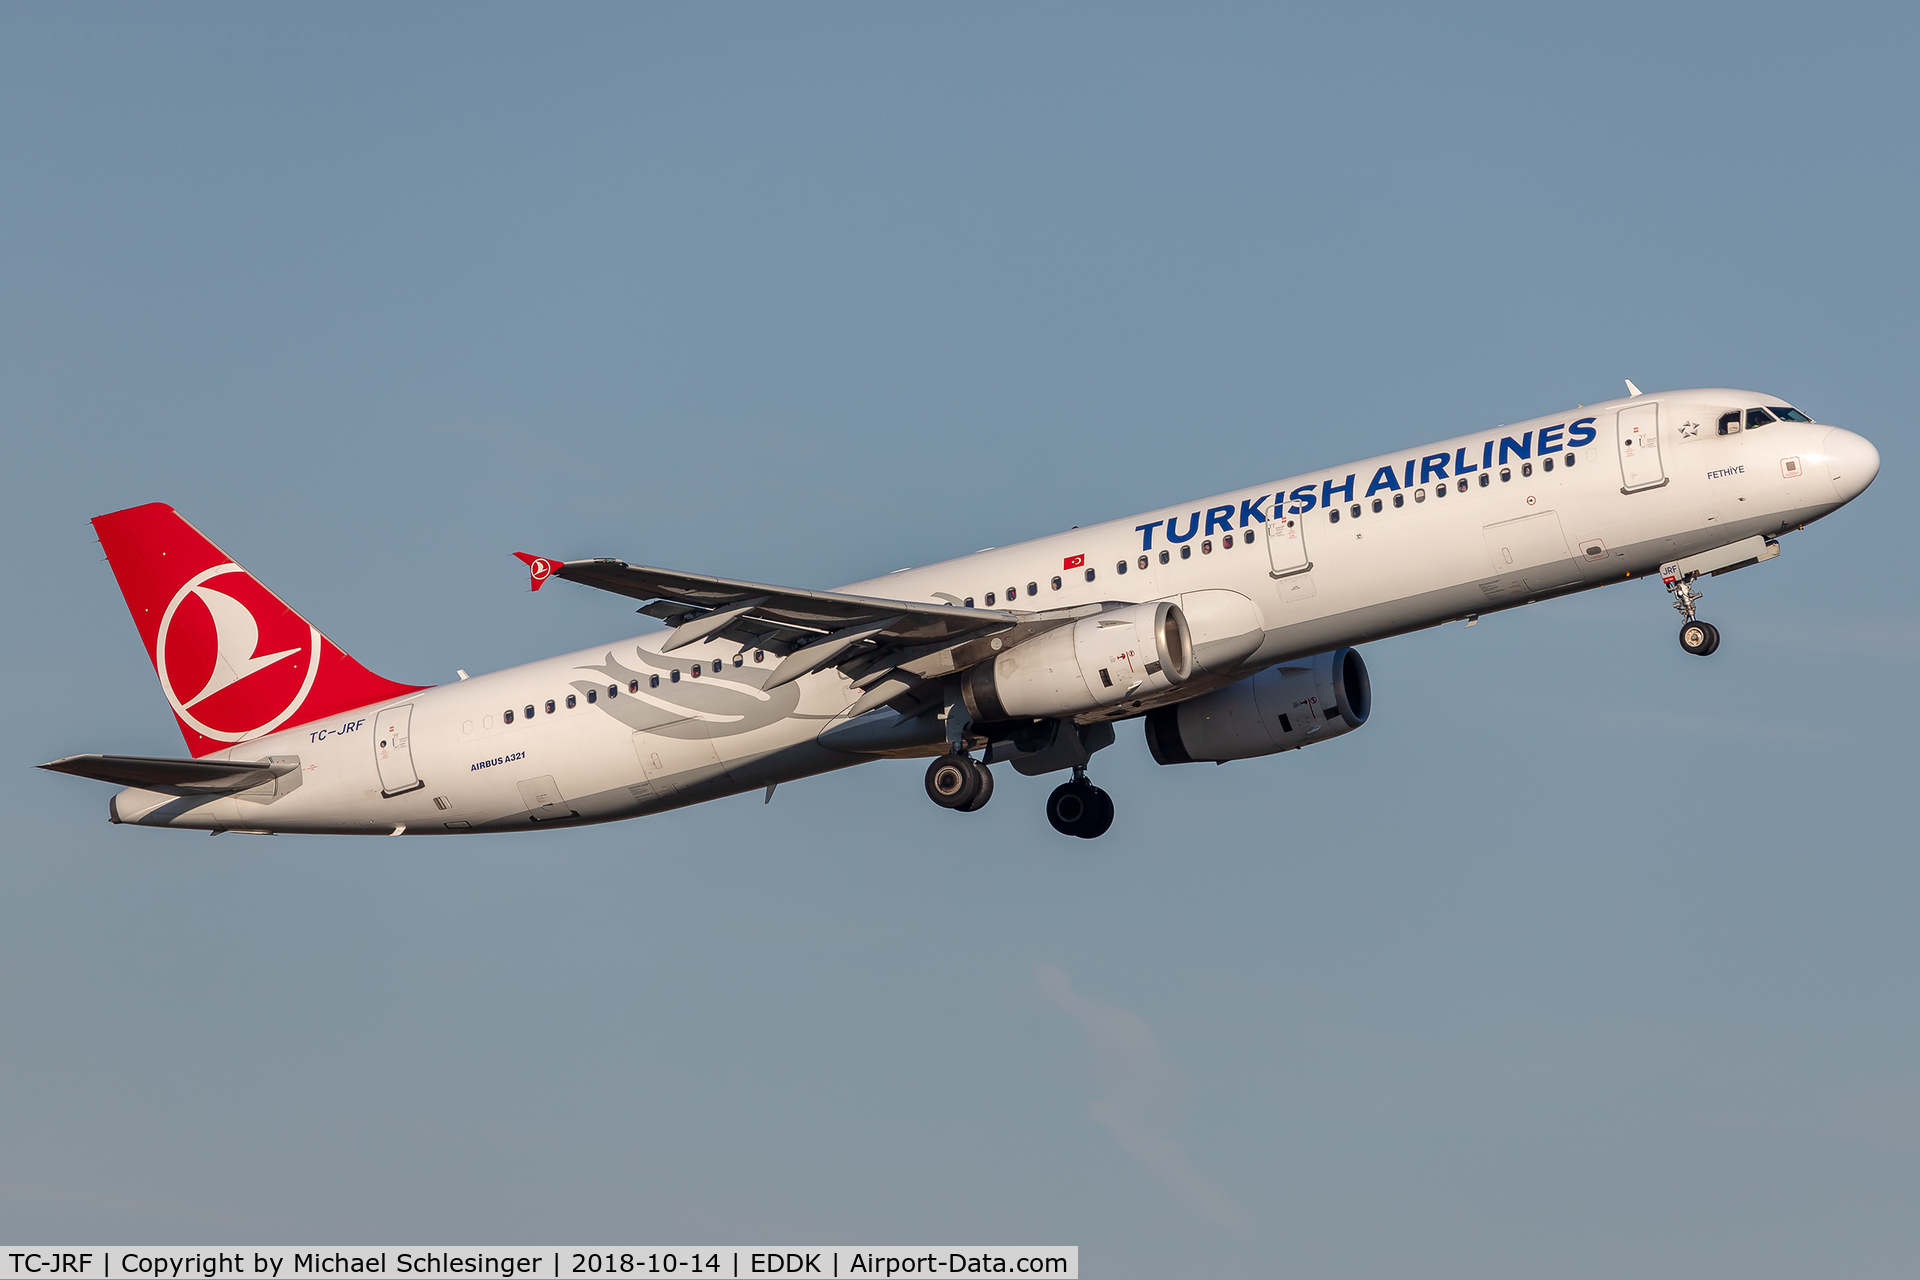 TC-JRF, 2007 Airbus A321-231 C/N 3207, TC-JRF - Airbus A321-231 - Turkish Airlines